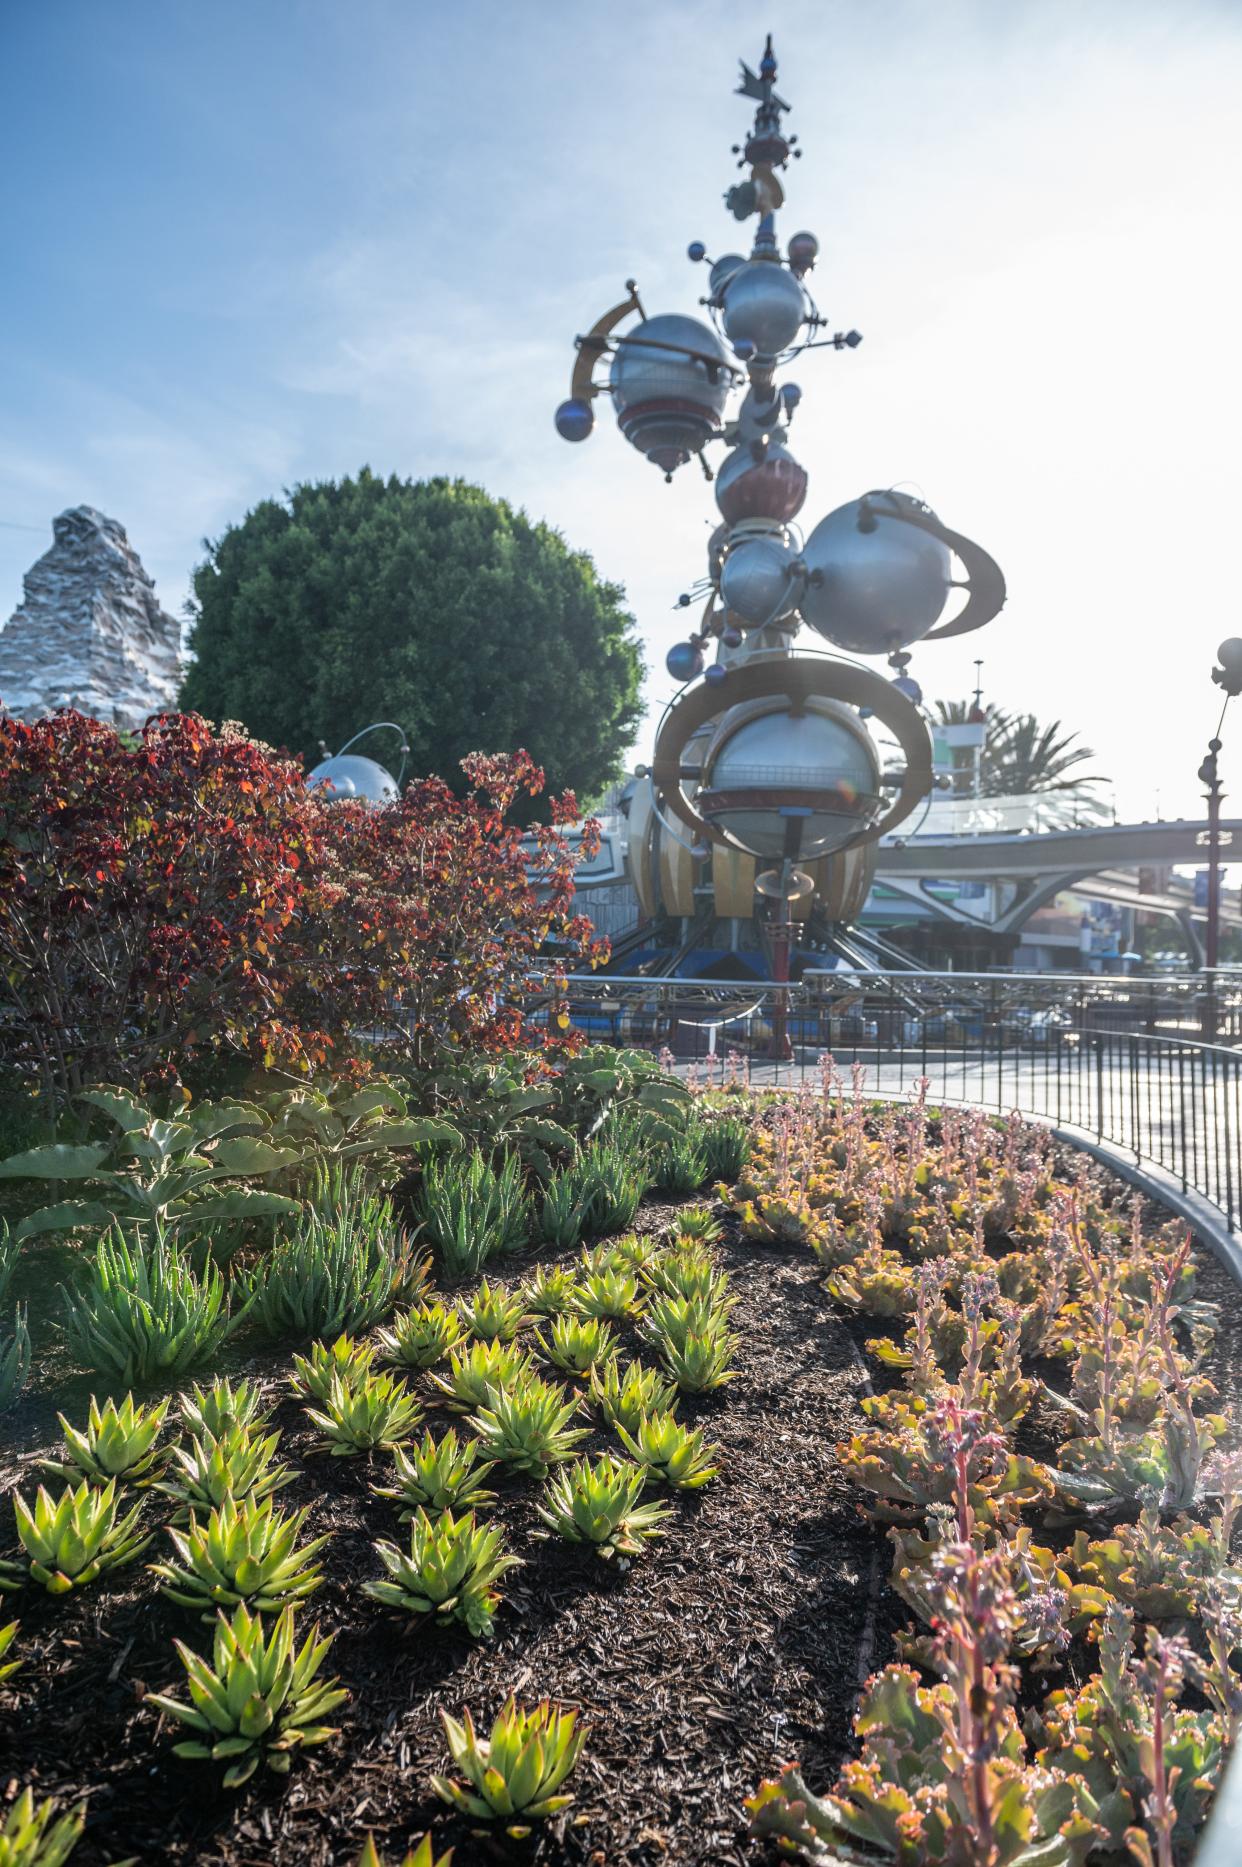 Disneyland uses drought-tolerant plants in many places and carefully monitors irrigation throughout the California resort.